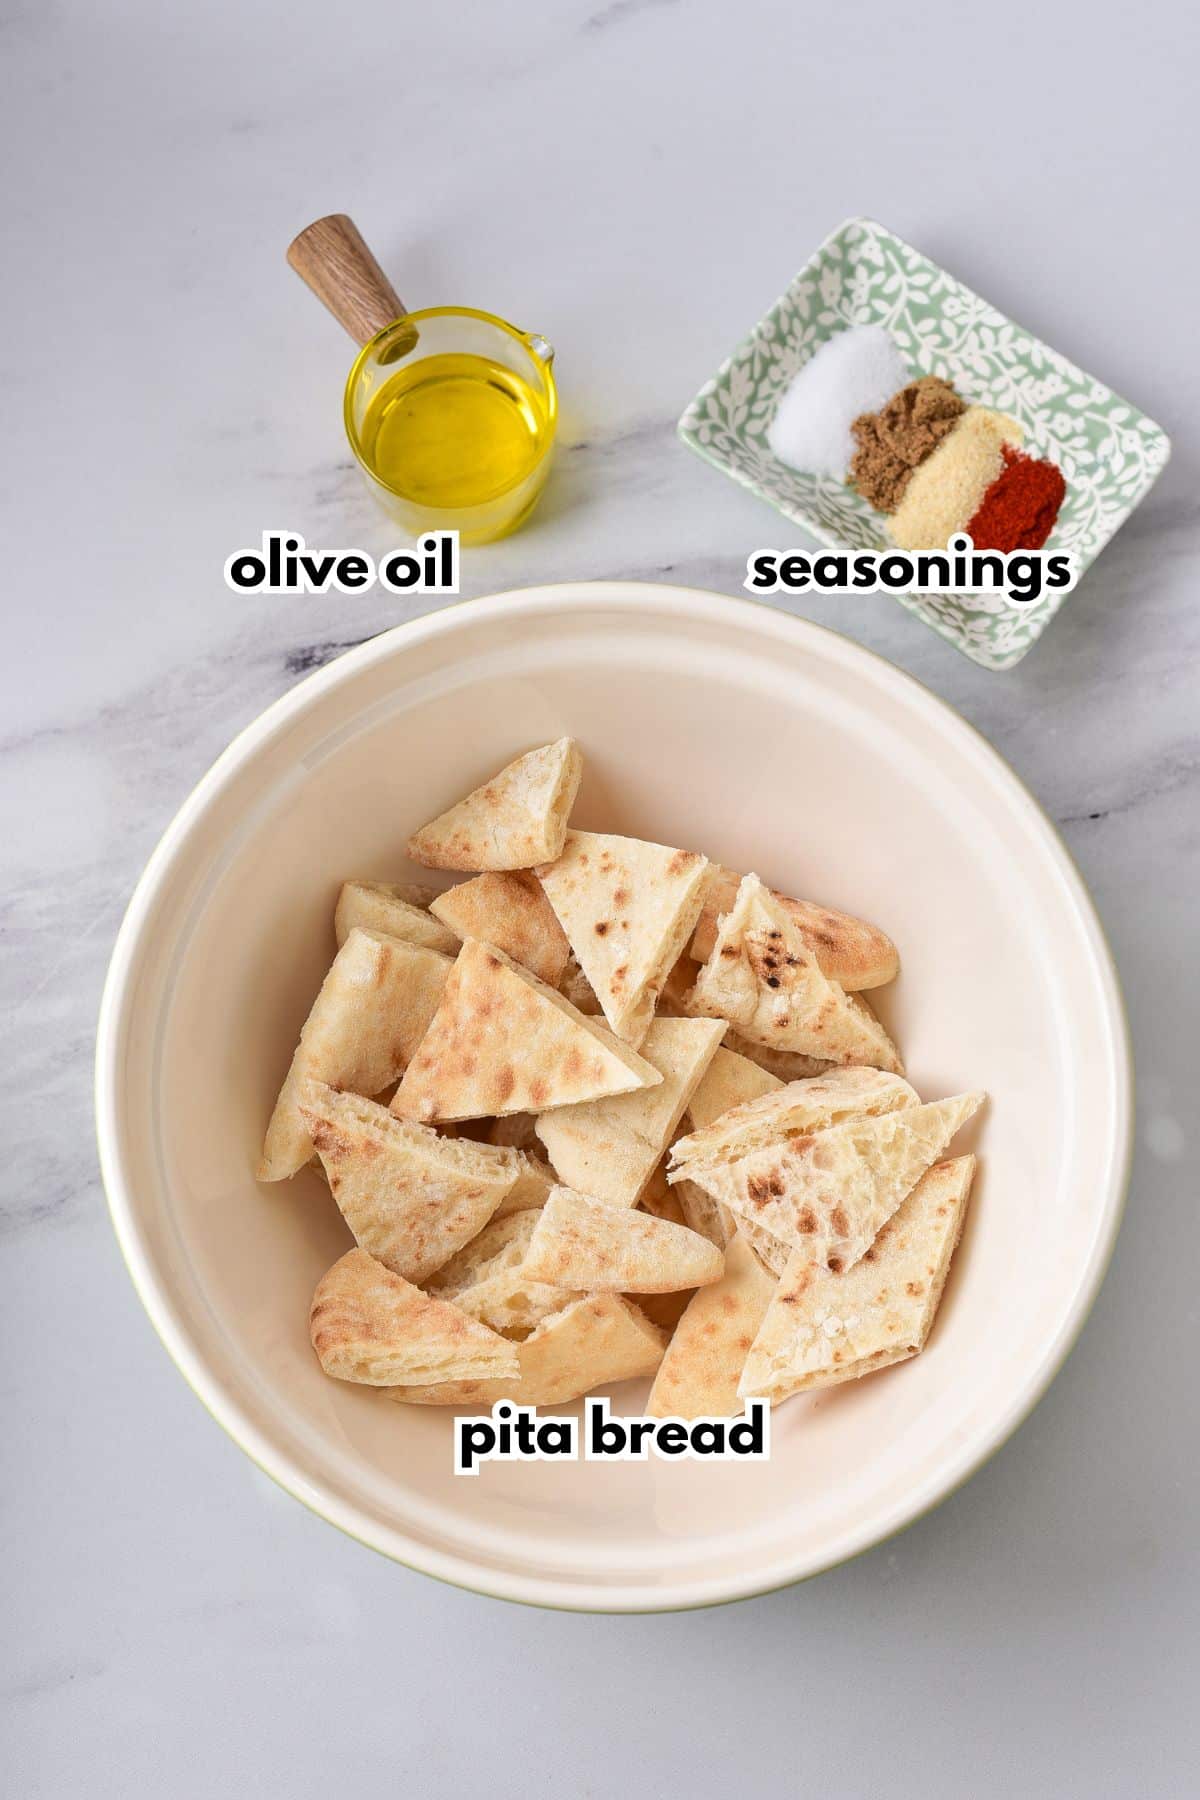 bowl of pita bread cut into triangles, cup of oil, and a small plate full of seasonings.